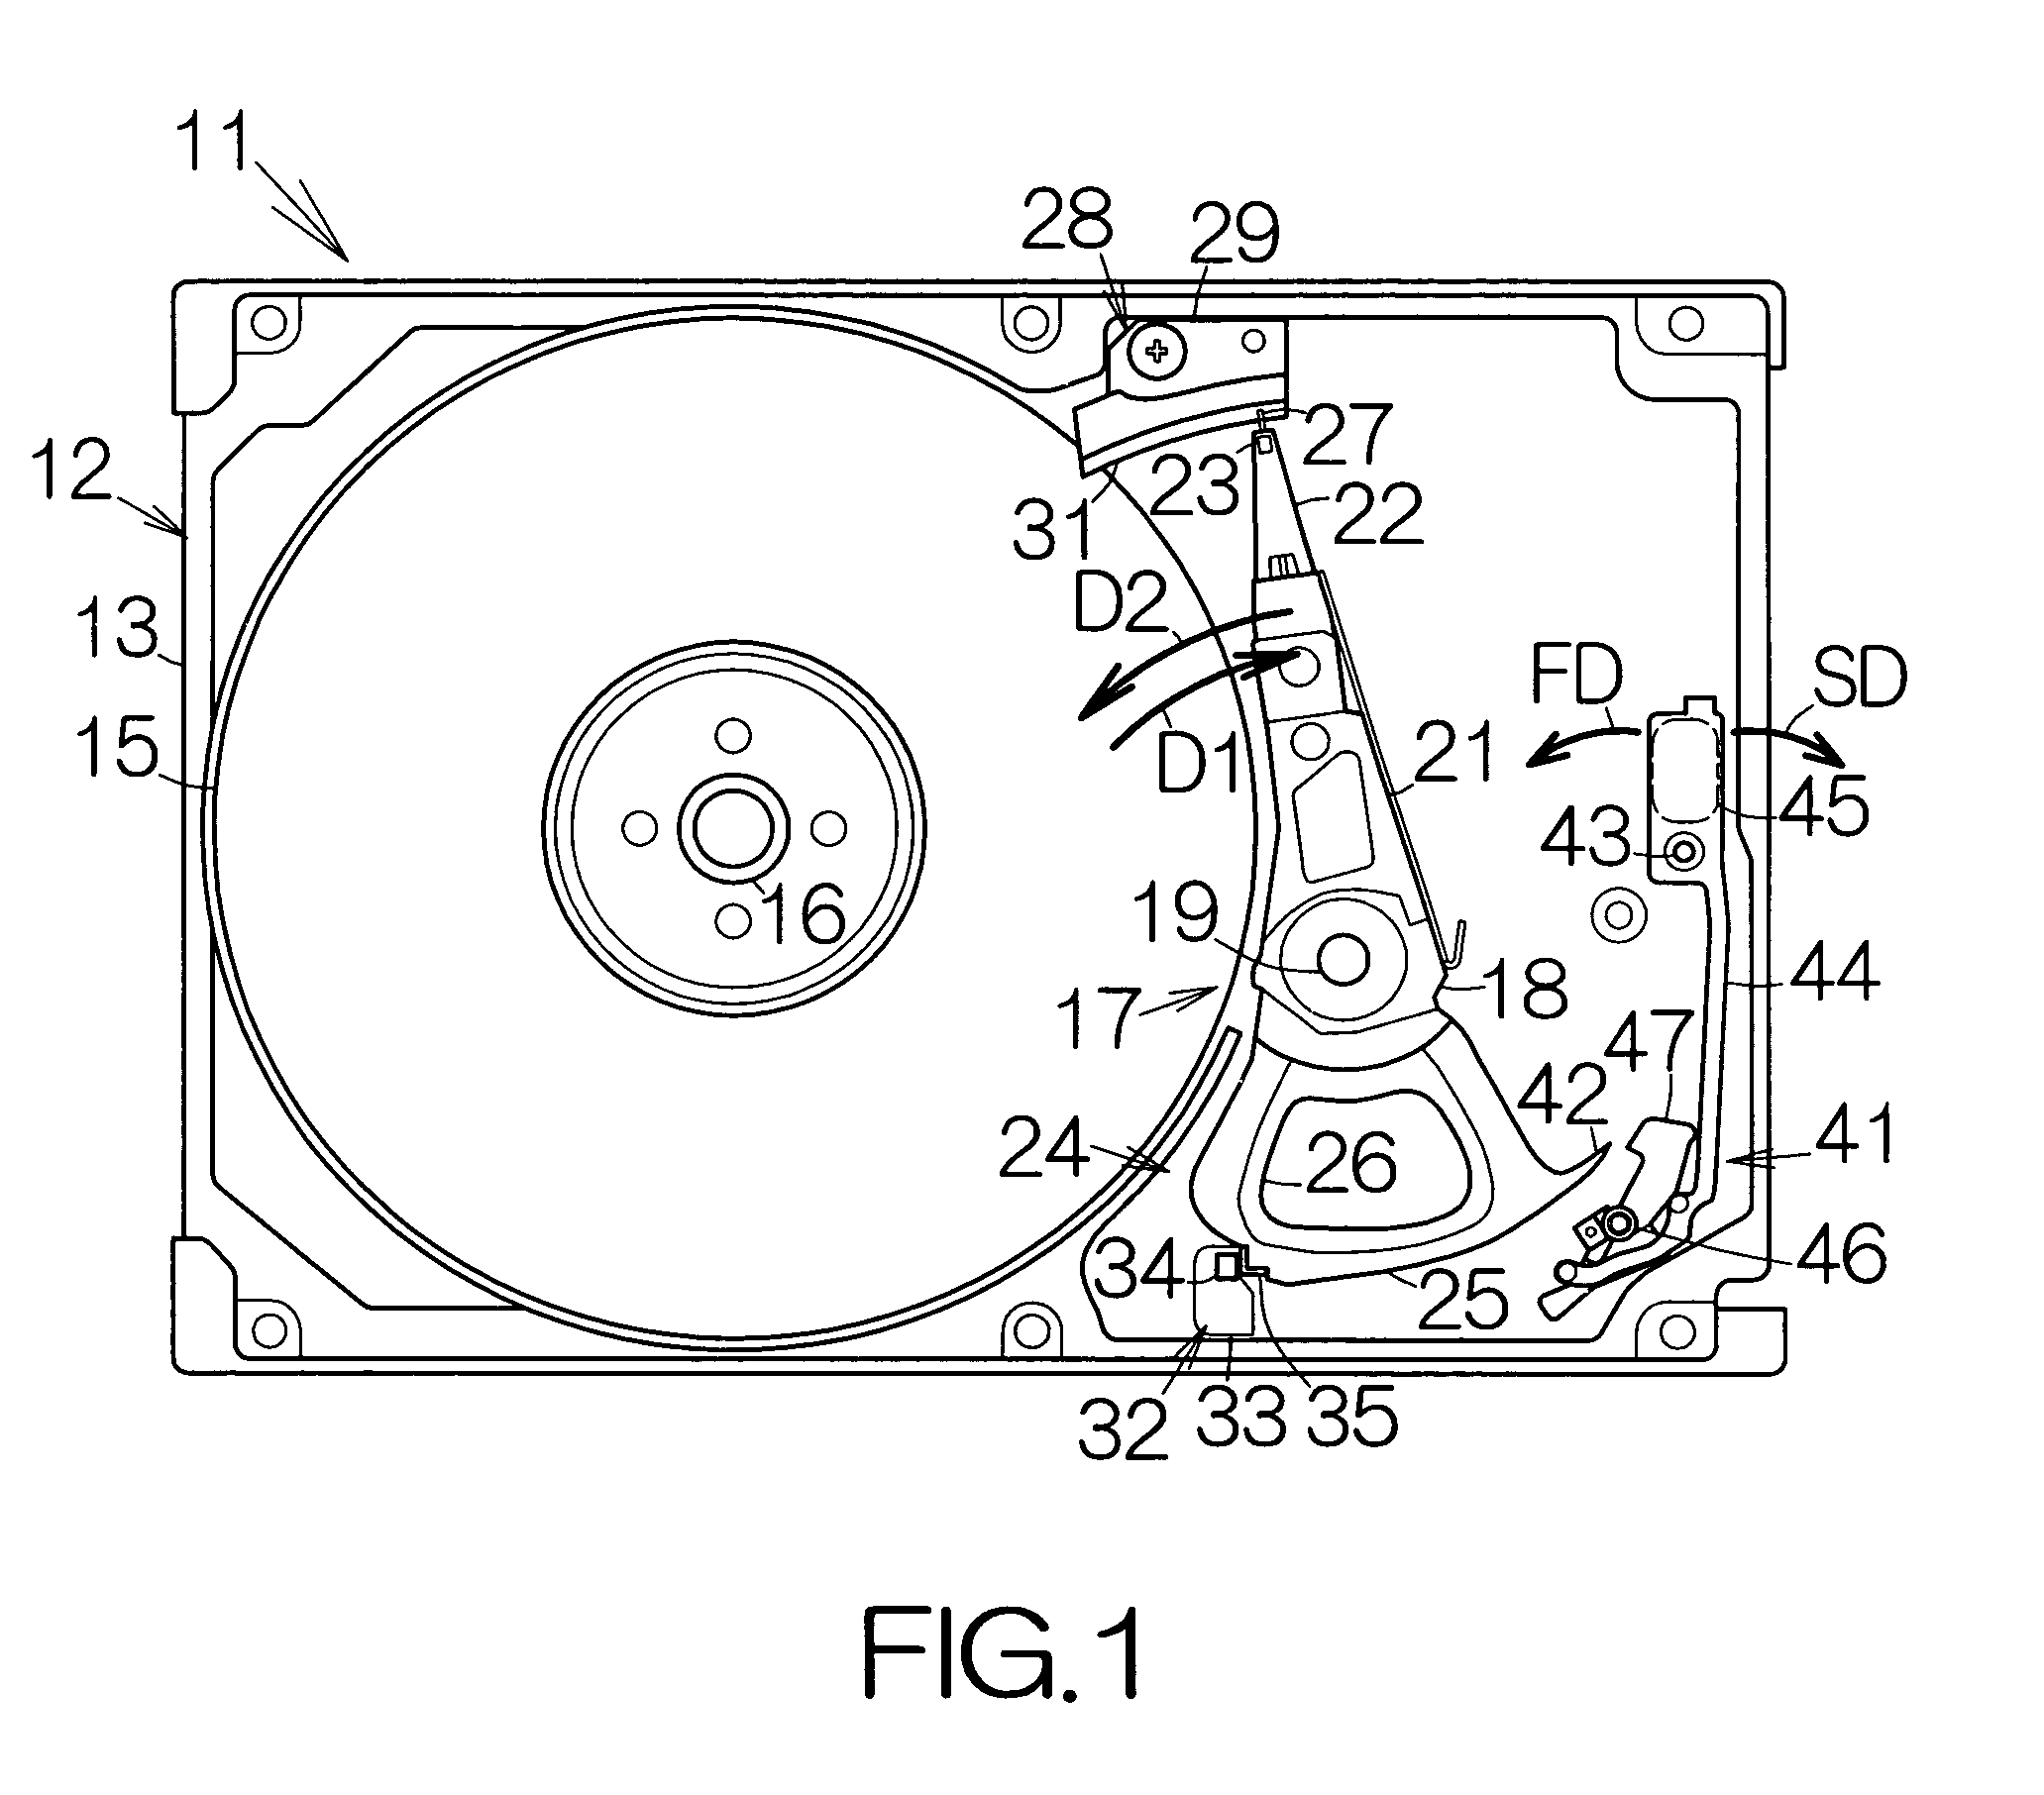 Disk drive internal latch assembly with movement restriction member to generate opposing rotation moments on shaft opposing sides